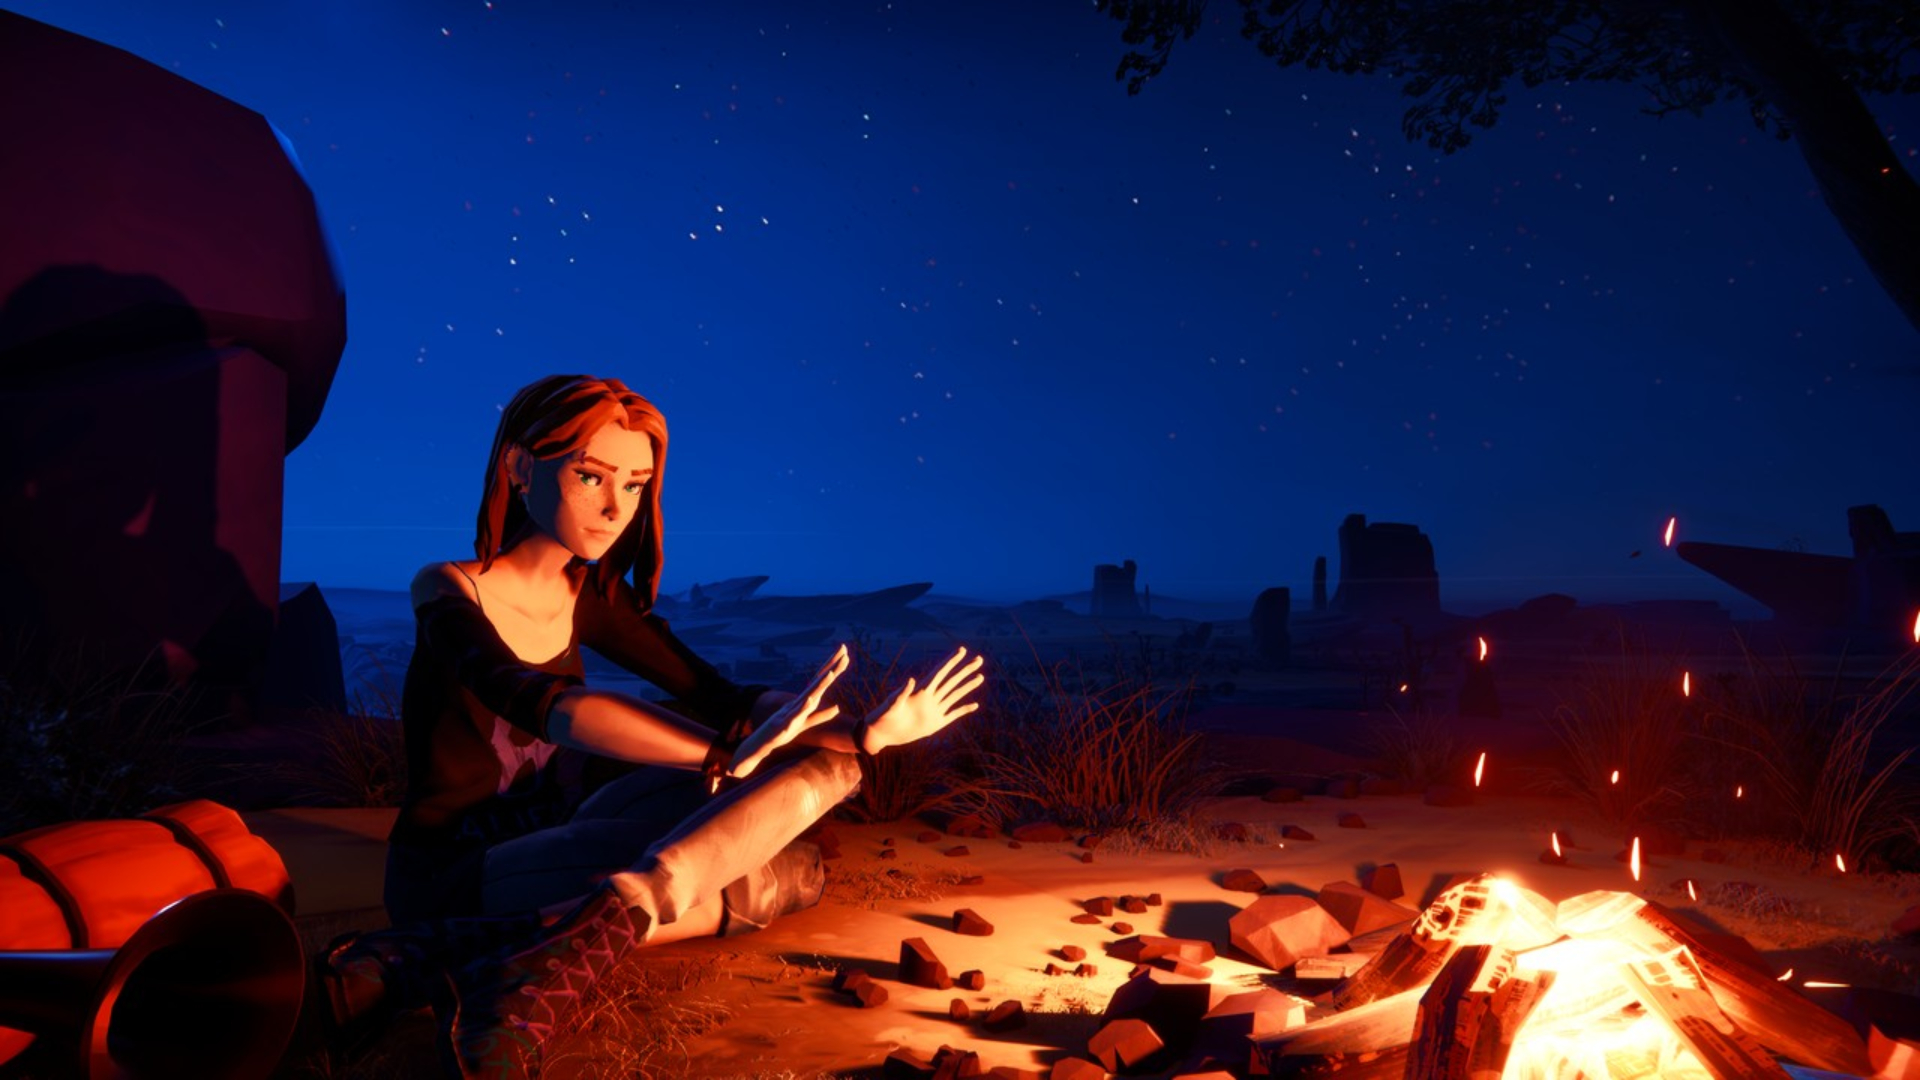 A girl sitting by a campfire